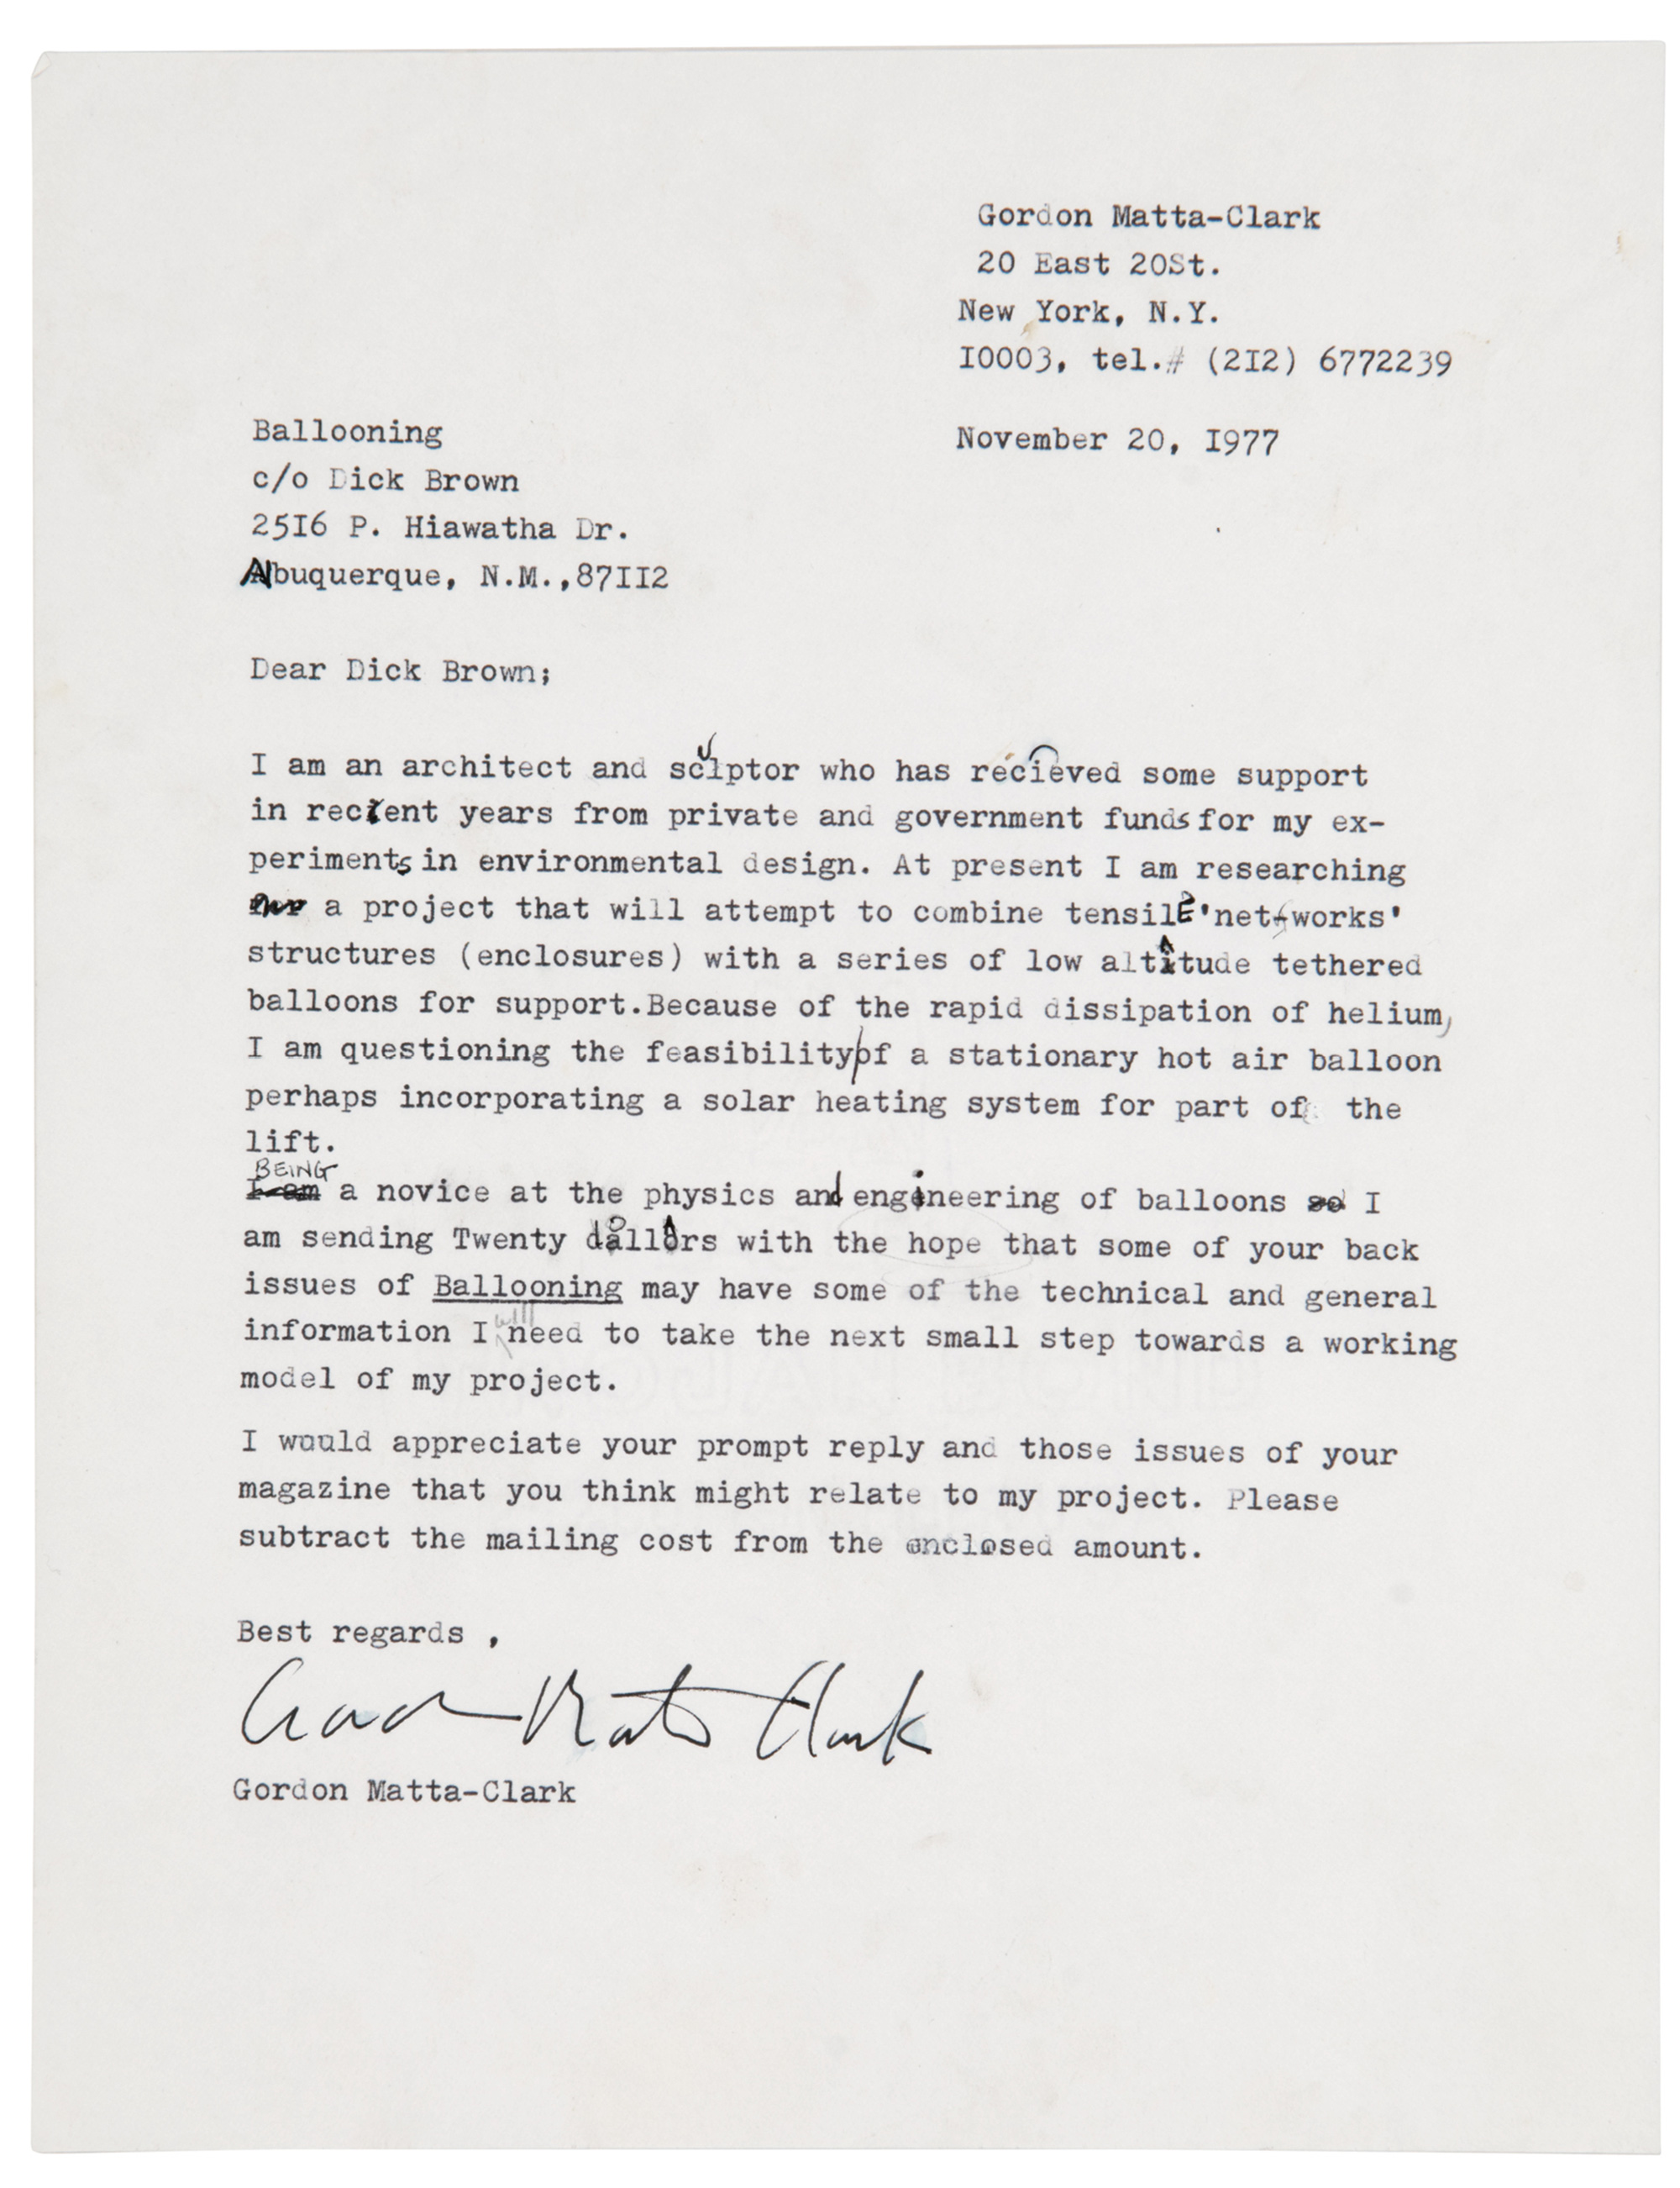 A nineteen seventy-seven letter from Gordon Matta-Clark to Dick Brown at Ballooning, The Journal of the Balloon Federation of America.